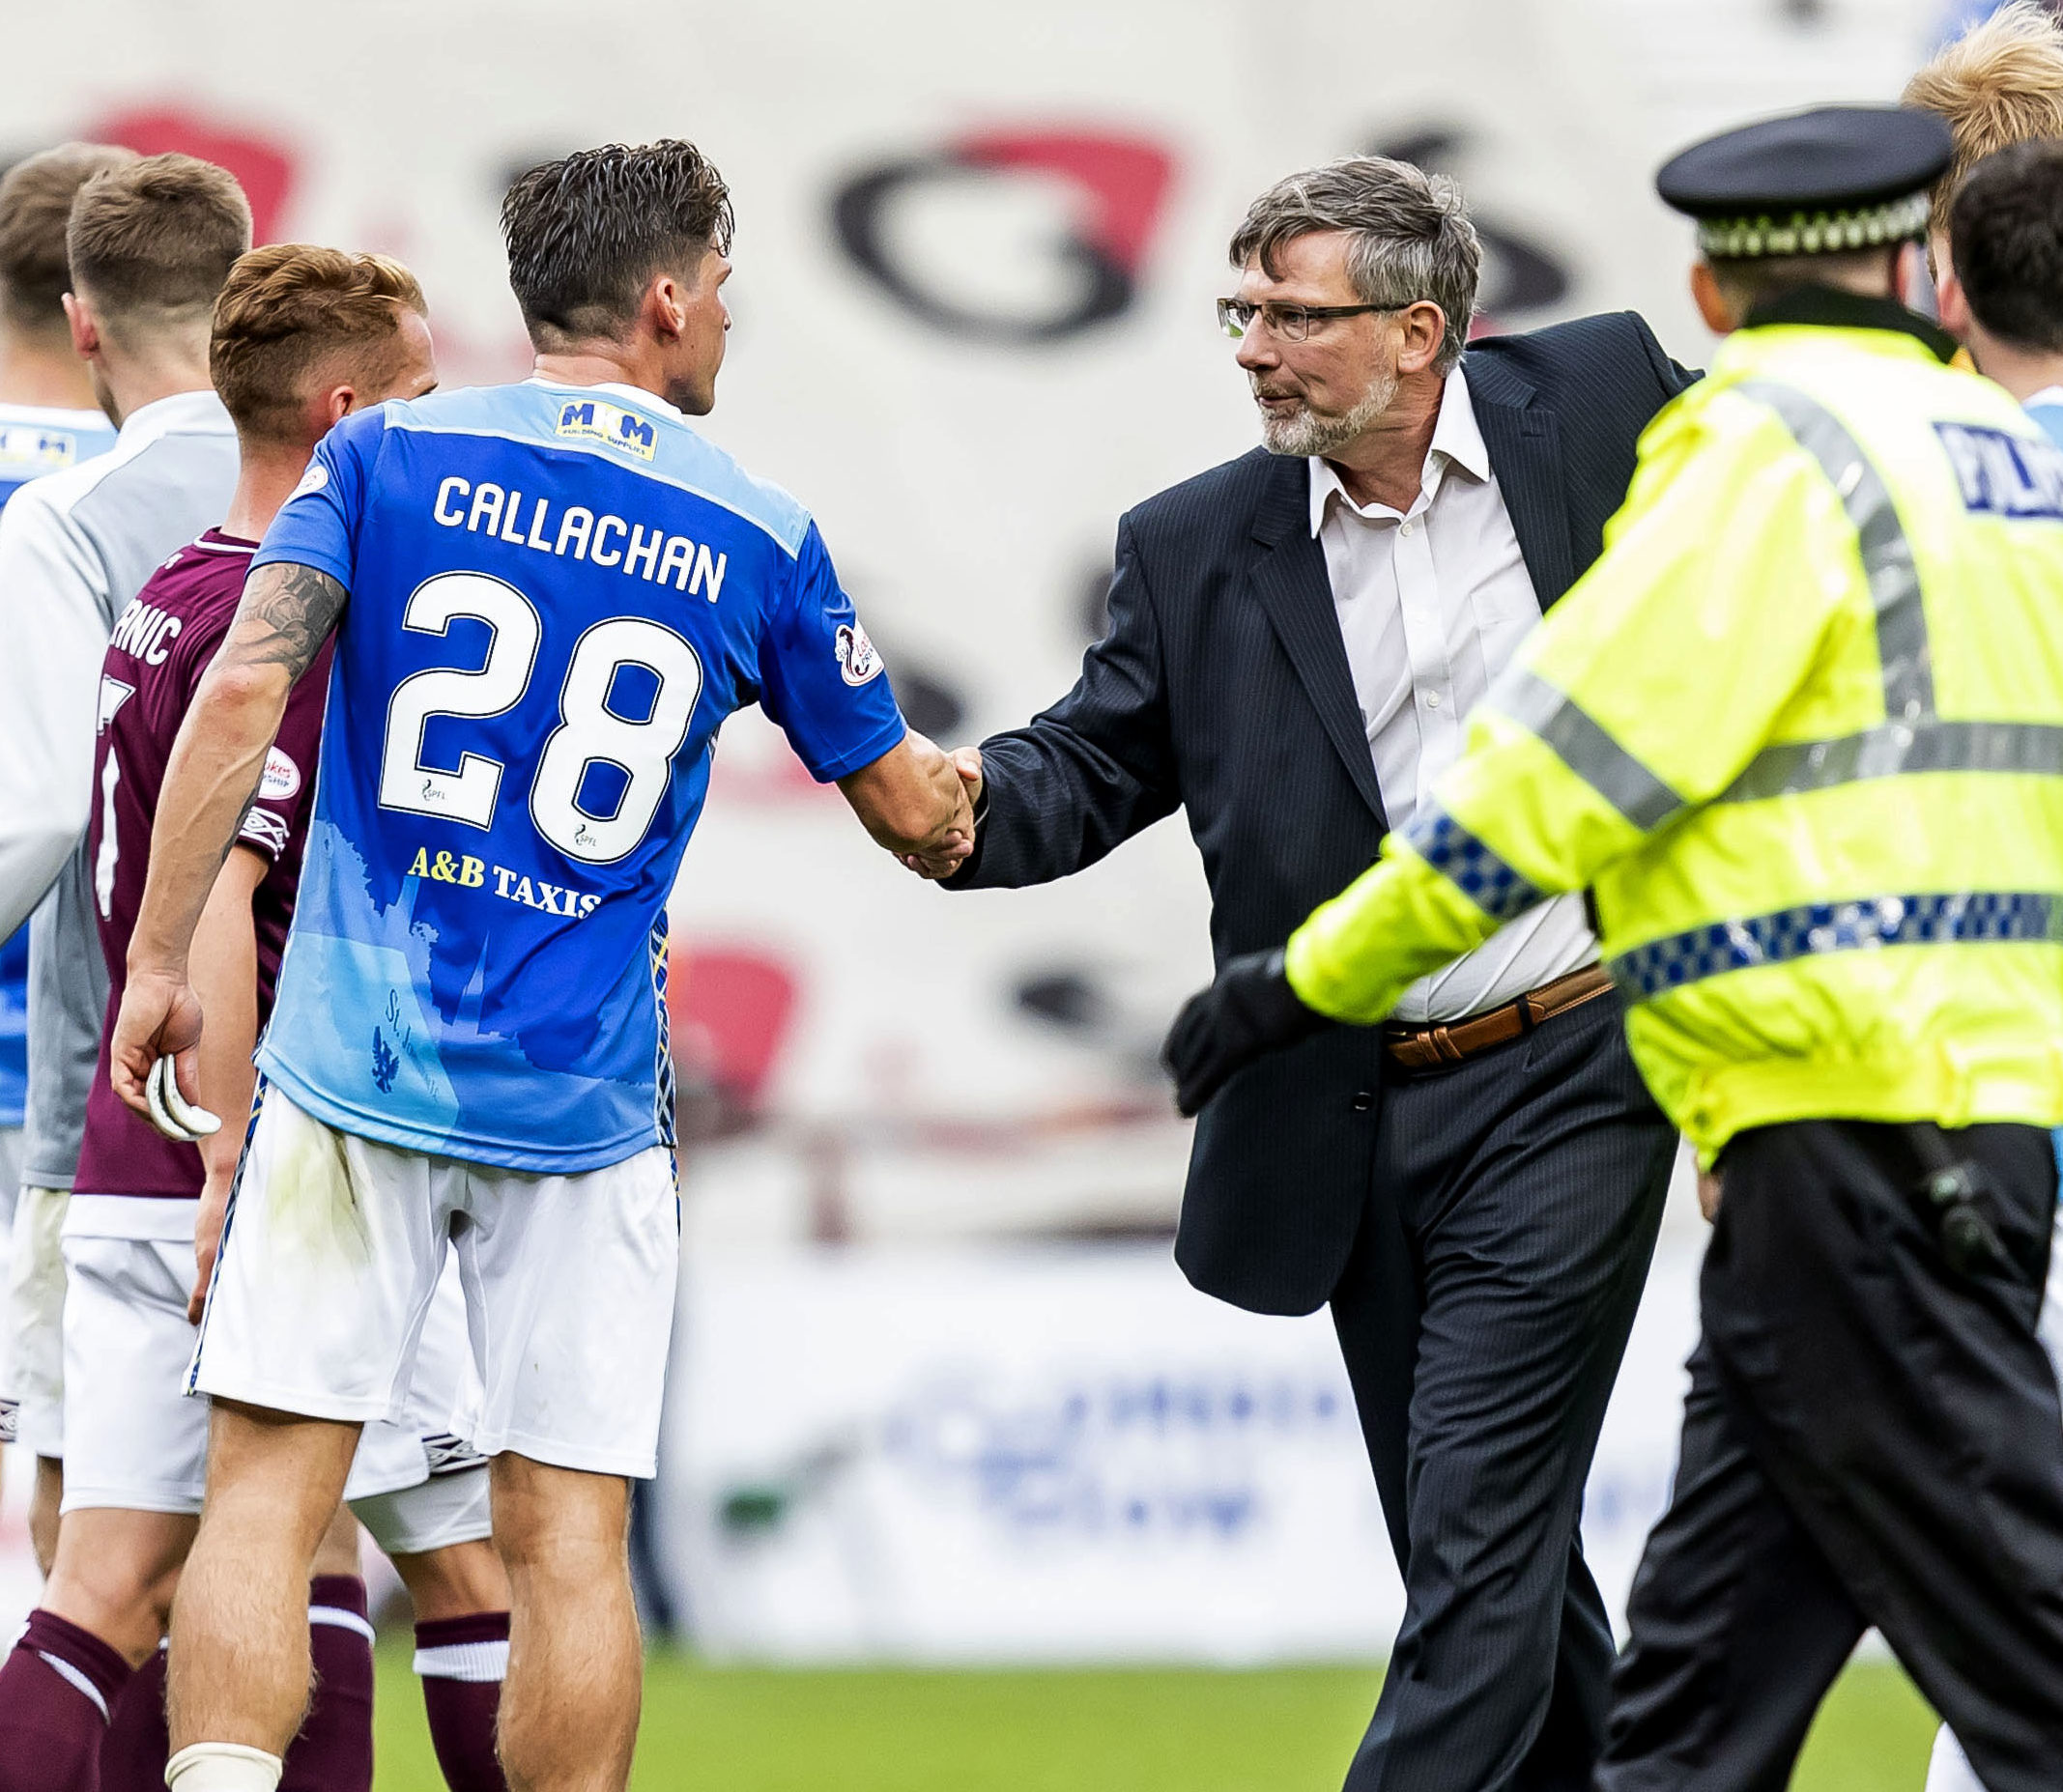 Hearts won the first game against St Johnstone this season.